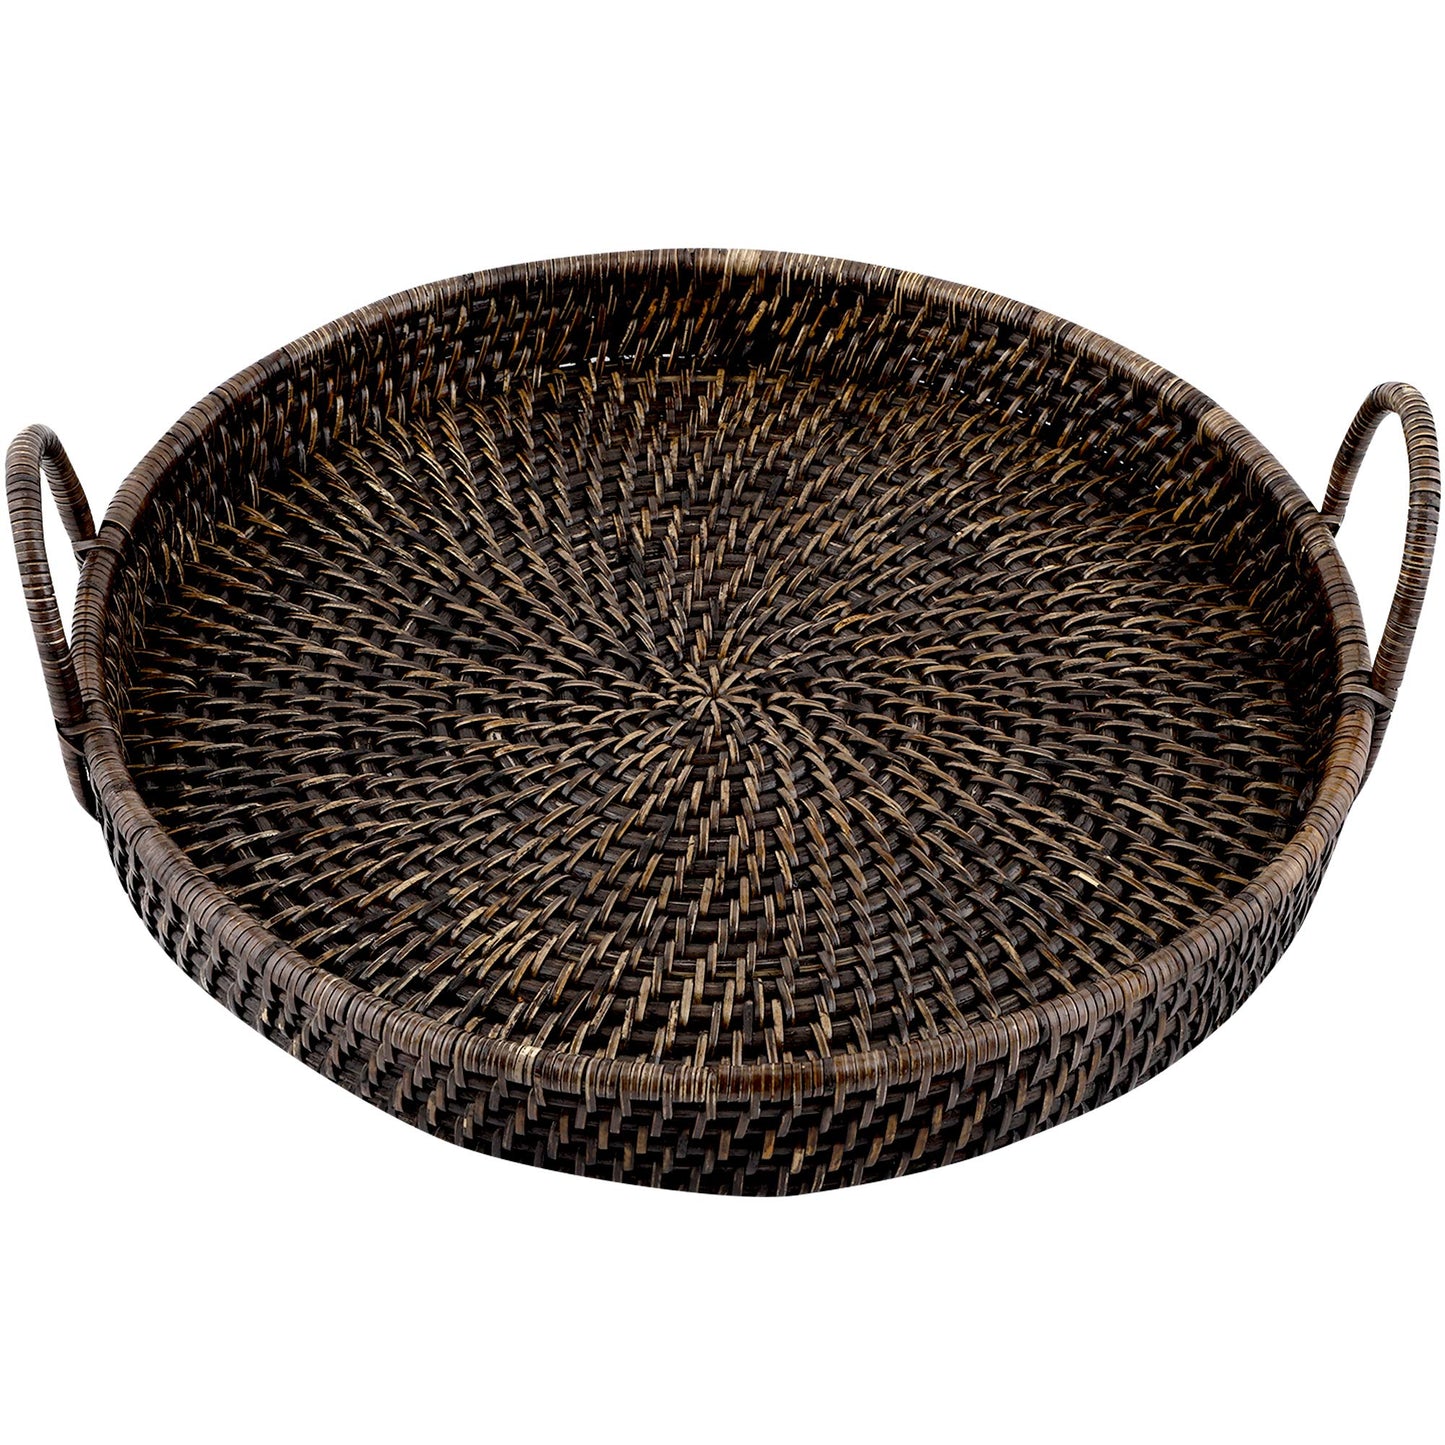 AKWAY Wicker Serving Tray Wooden Serving Tray for Home | Dining Table Decorative Trays | Serving Tray for Party Guests | Rectangle Platter with Handles Diwali or Deepawali Gifts (Antique Black) - Akway